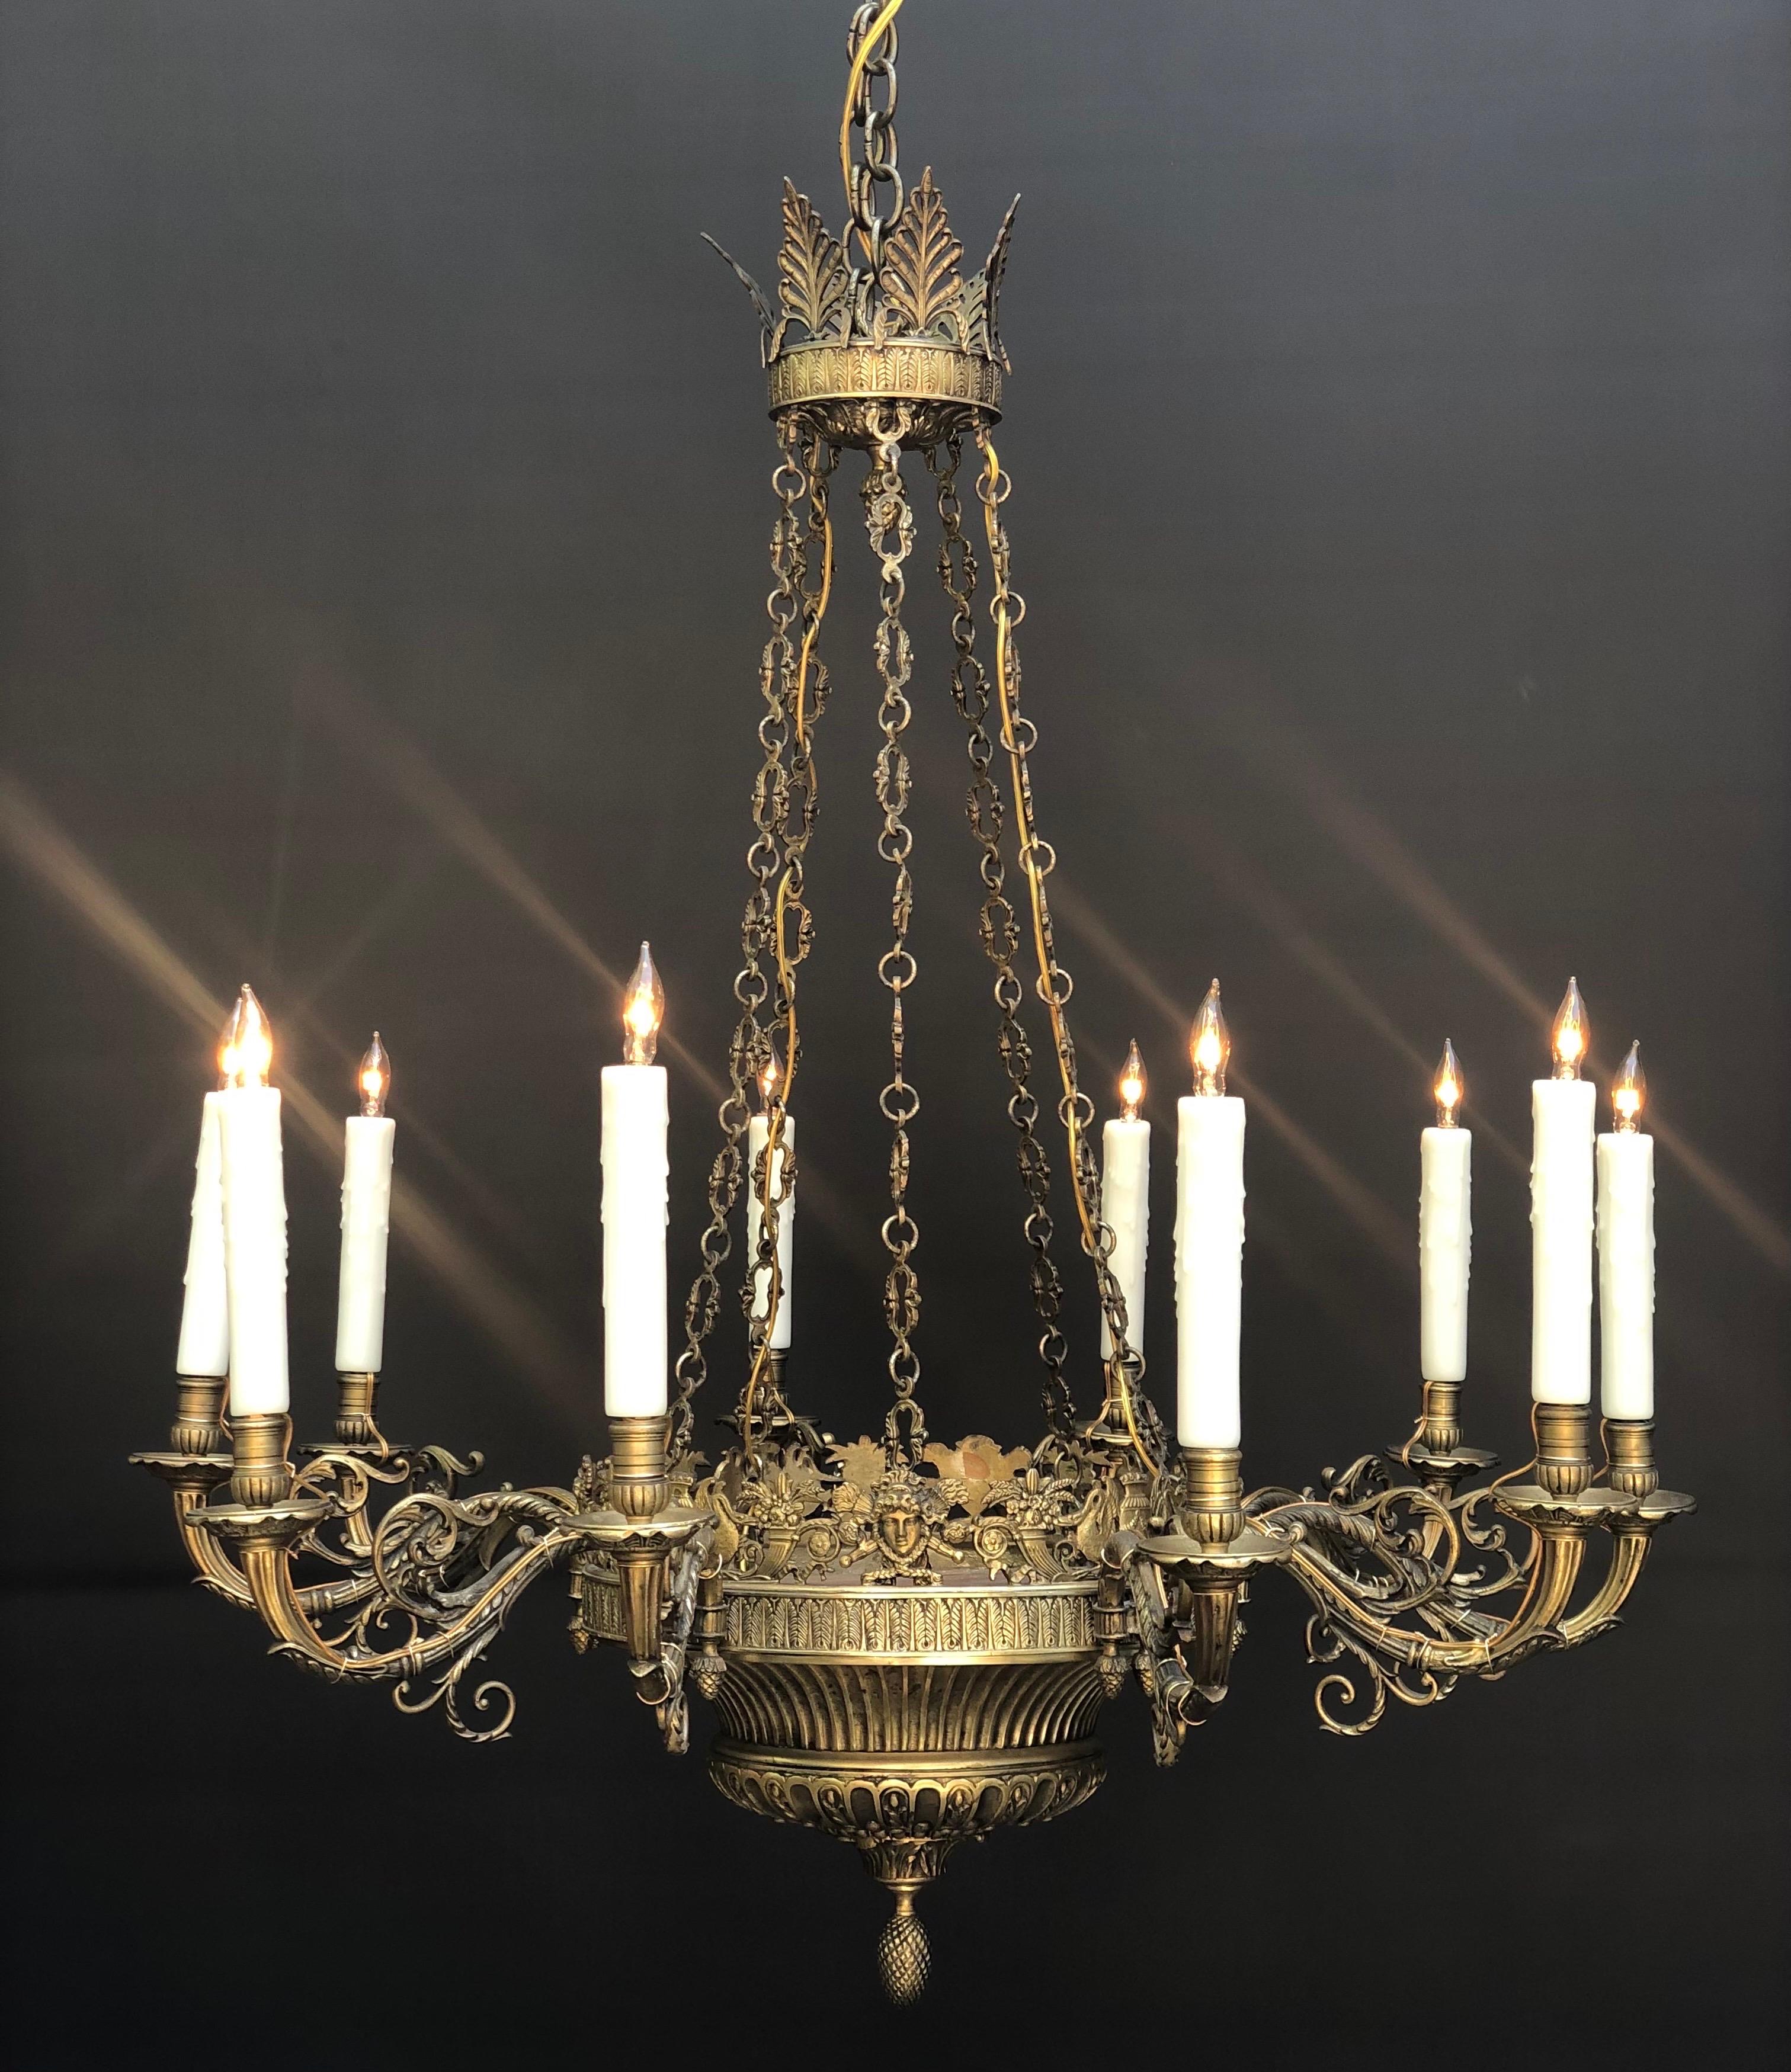 Exceptional bronze Italian Neoclassical bronze chandelier is made in the early 19th century. The classical style chandelier is made of bronze in the finest casting. The cast bronze crown is topped with six pierced Anthemion leaves on a fine cast